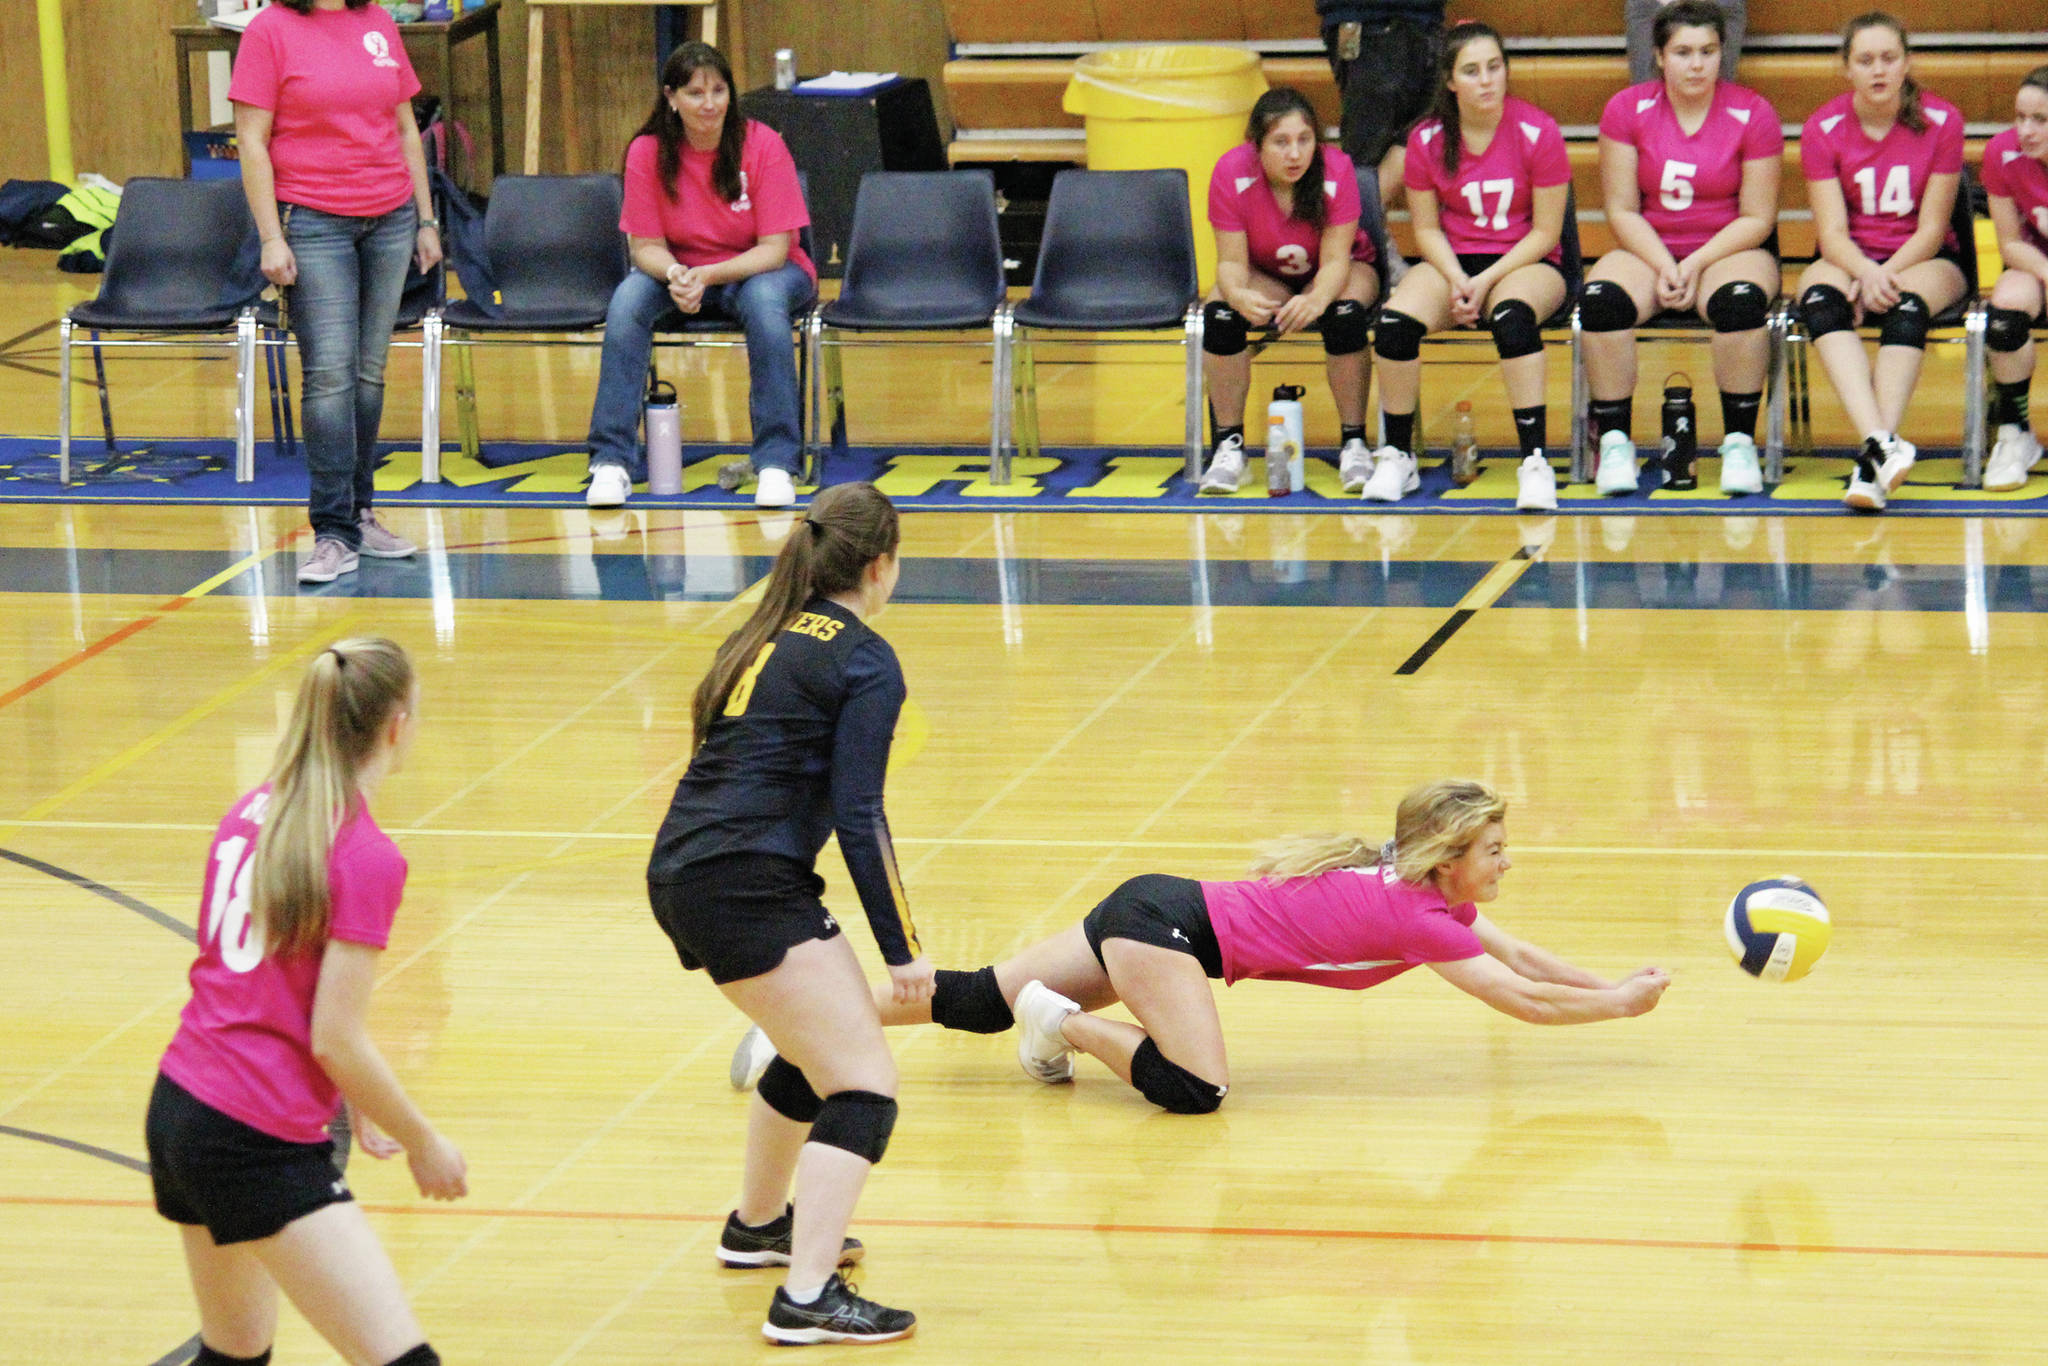 Homer’s Sela Weisser dives for the ball during a Friday, Oct. 18, 2019 volleyball game against Seward High School in the Alice Witte Gymnaisum in Homer, Alaska. (Photo by Megan Pacer/Homer News)